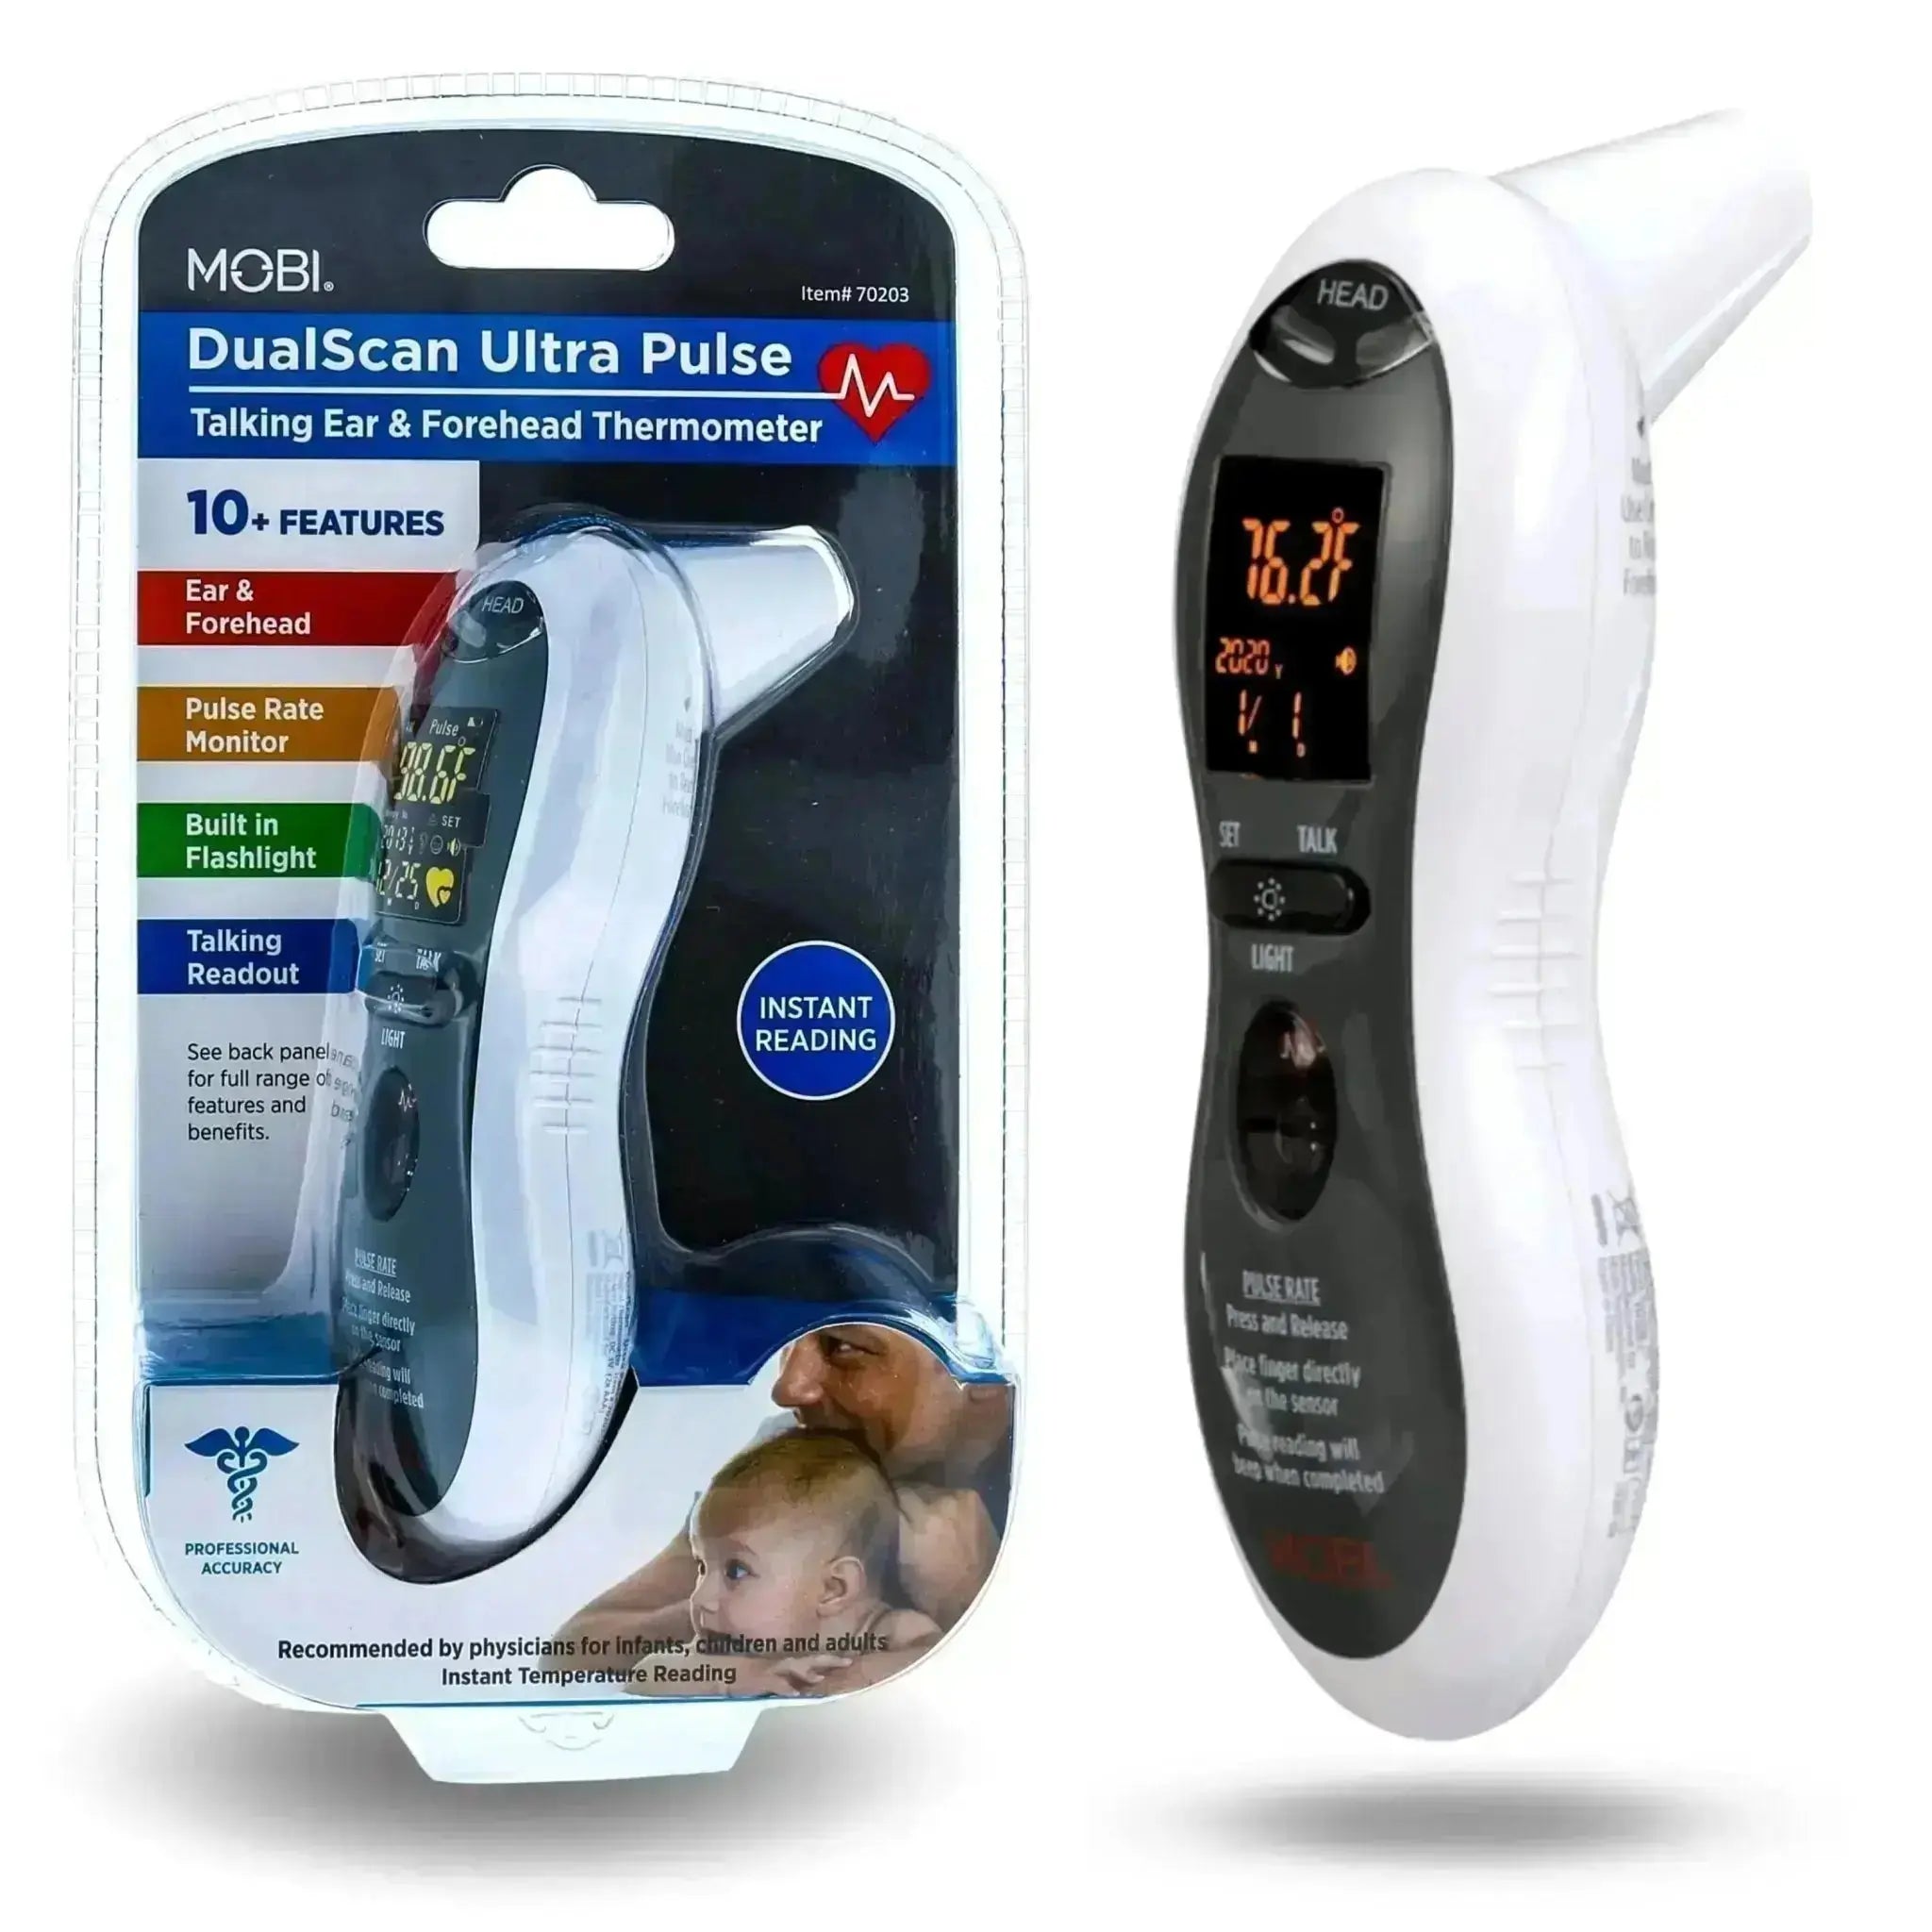 DualScan Ultra Pulse Talking Ear & Forehead Thermometer with 10+ Features